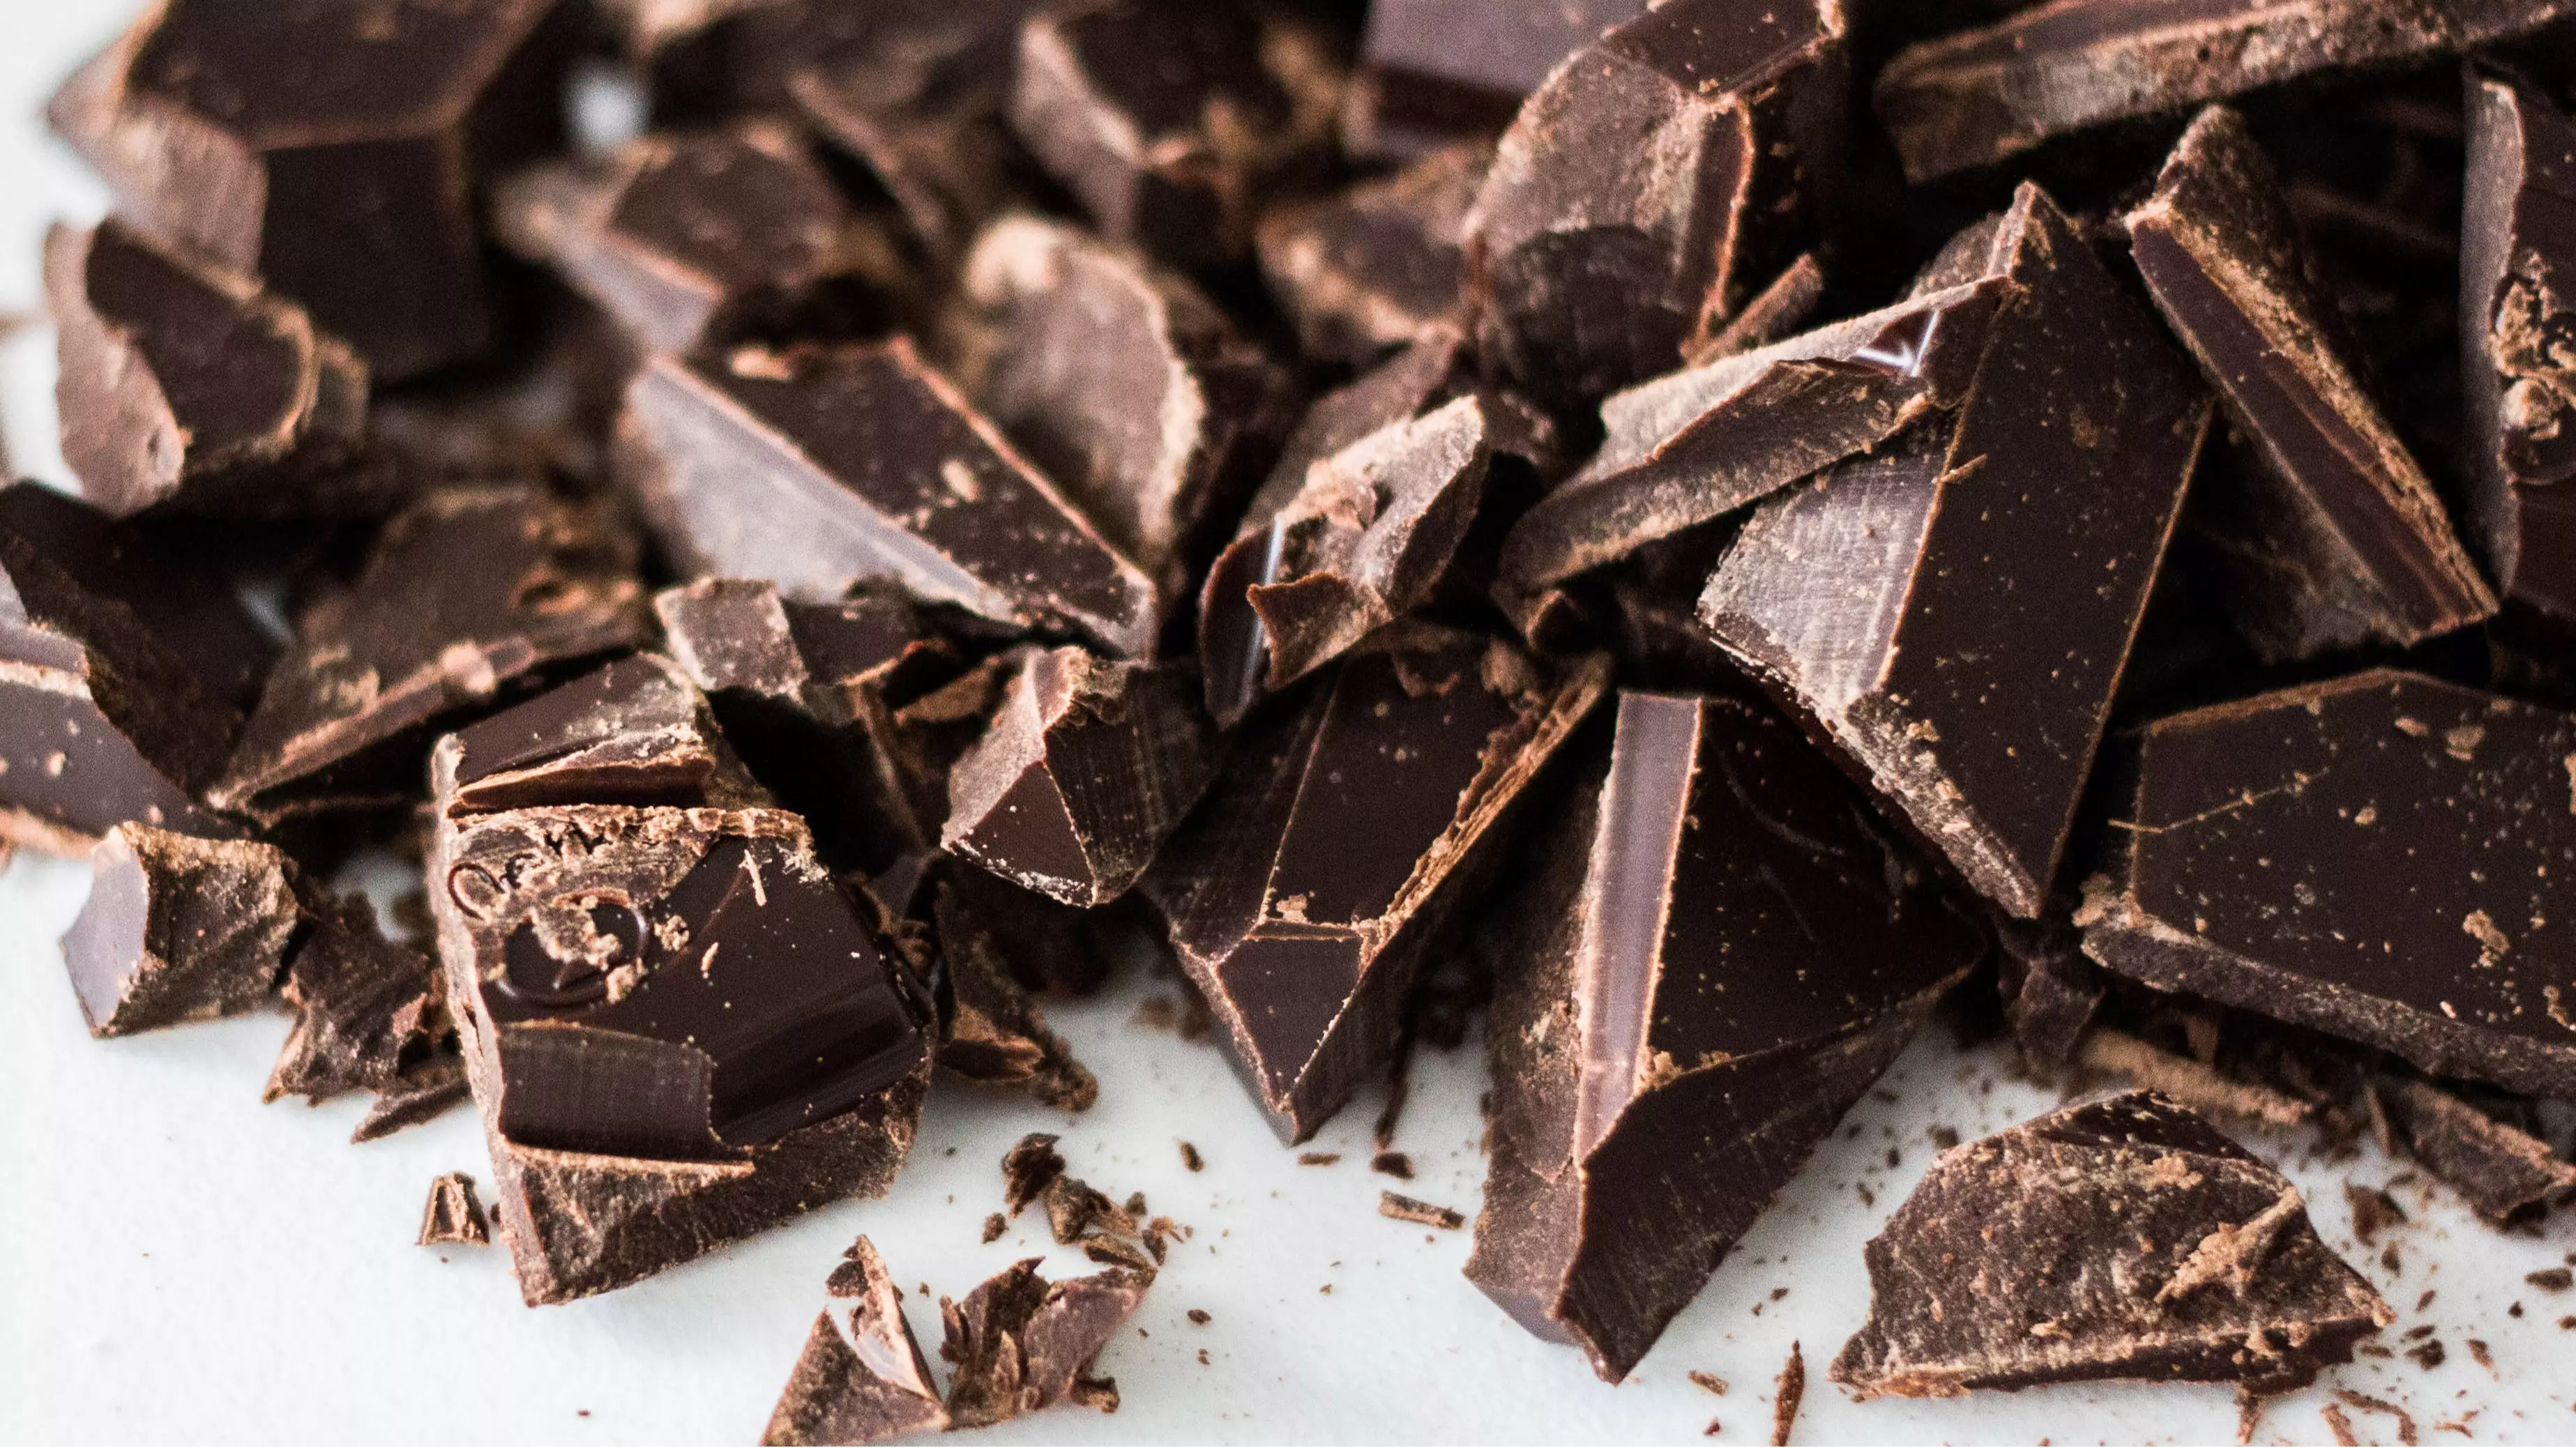 Study Finds Eating Chocolate For Breakfast Could Counteract Effects Of Insomnia In Women